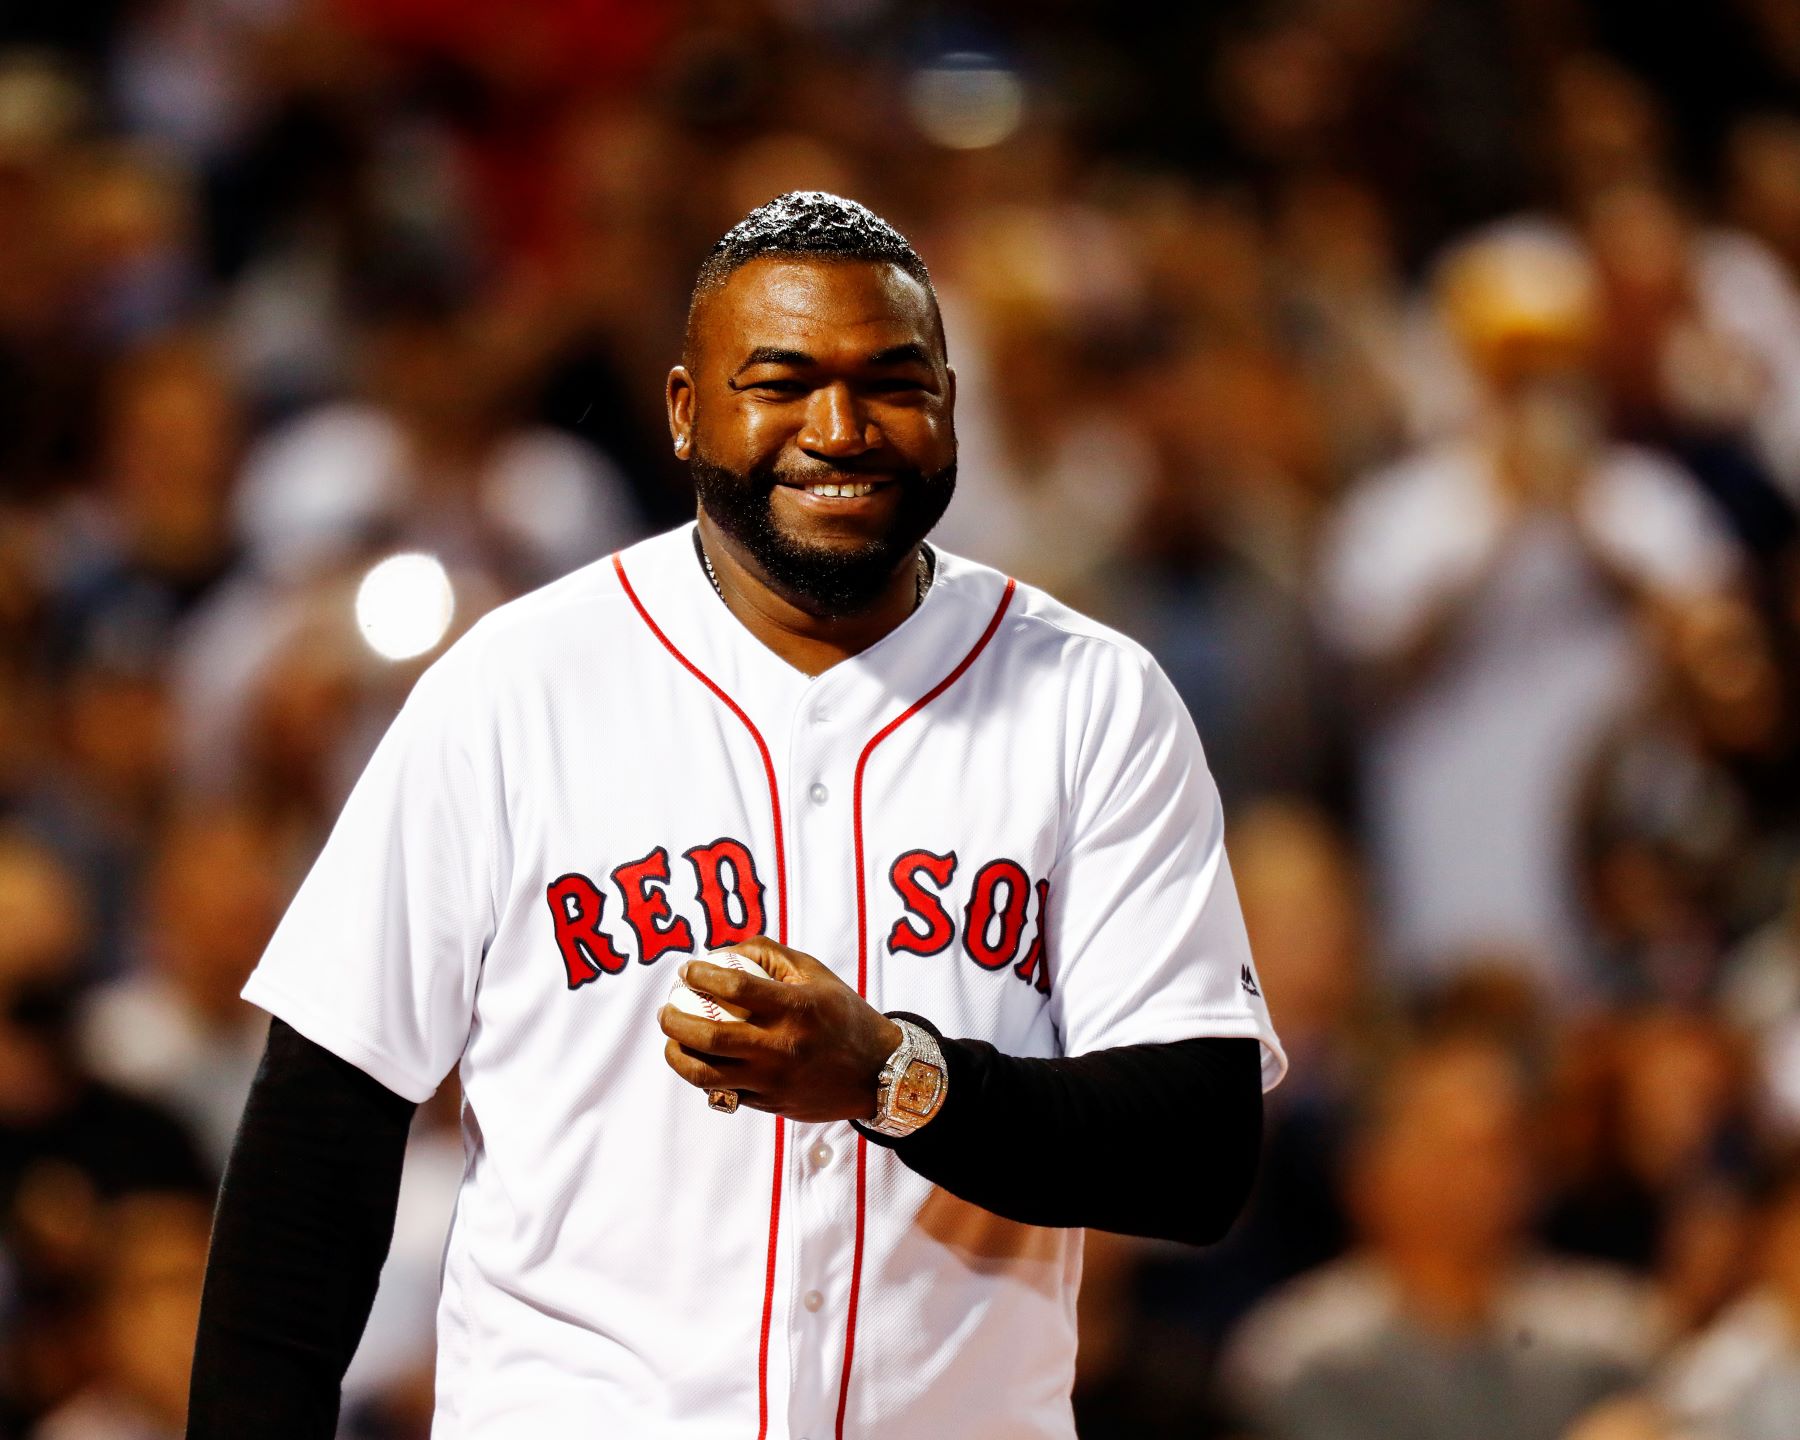 Former Boston Red Sox player David Ortiz at Fenway Park for a game against the New York Yankees